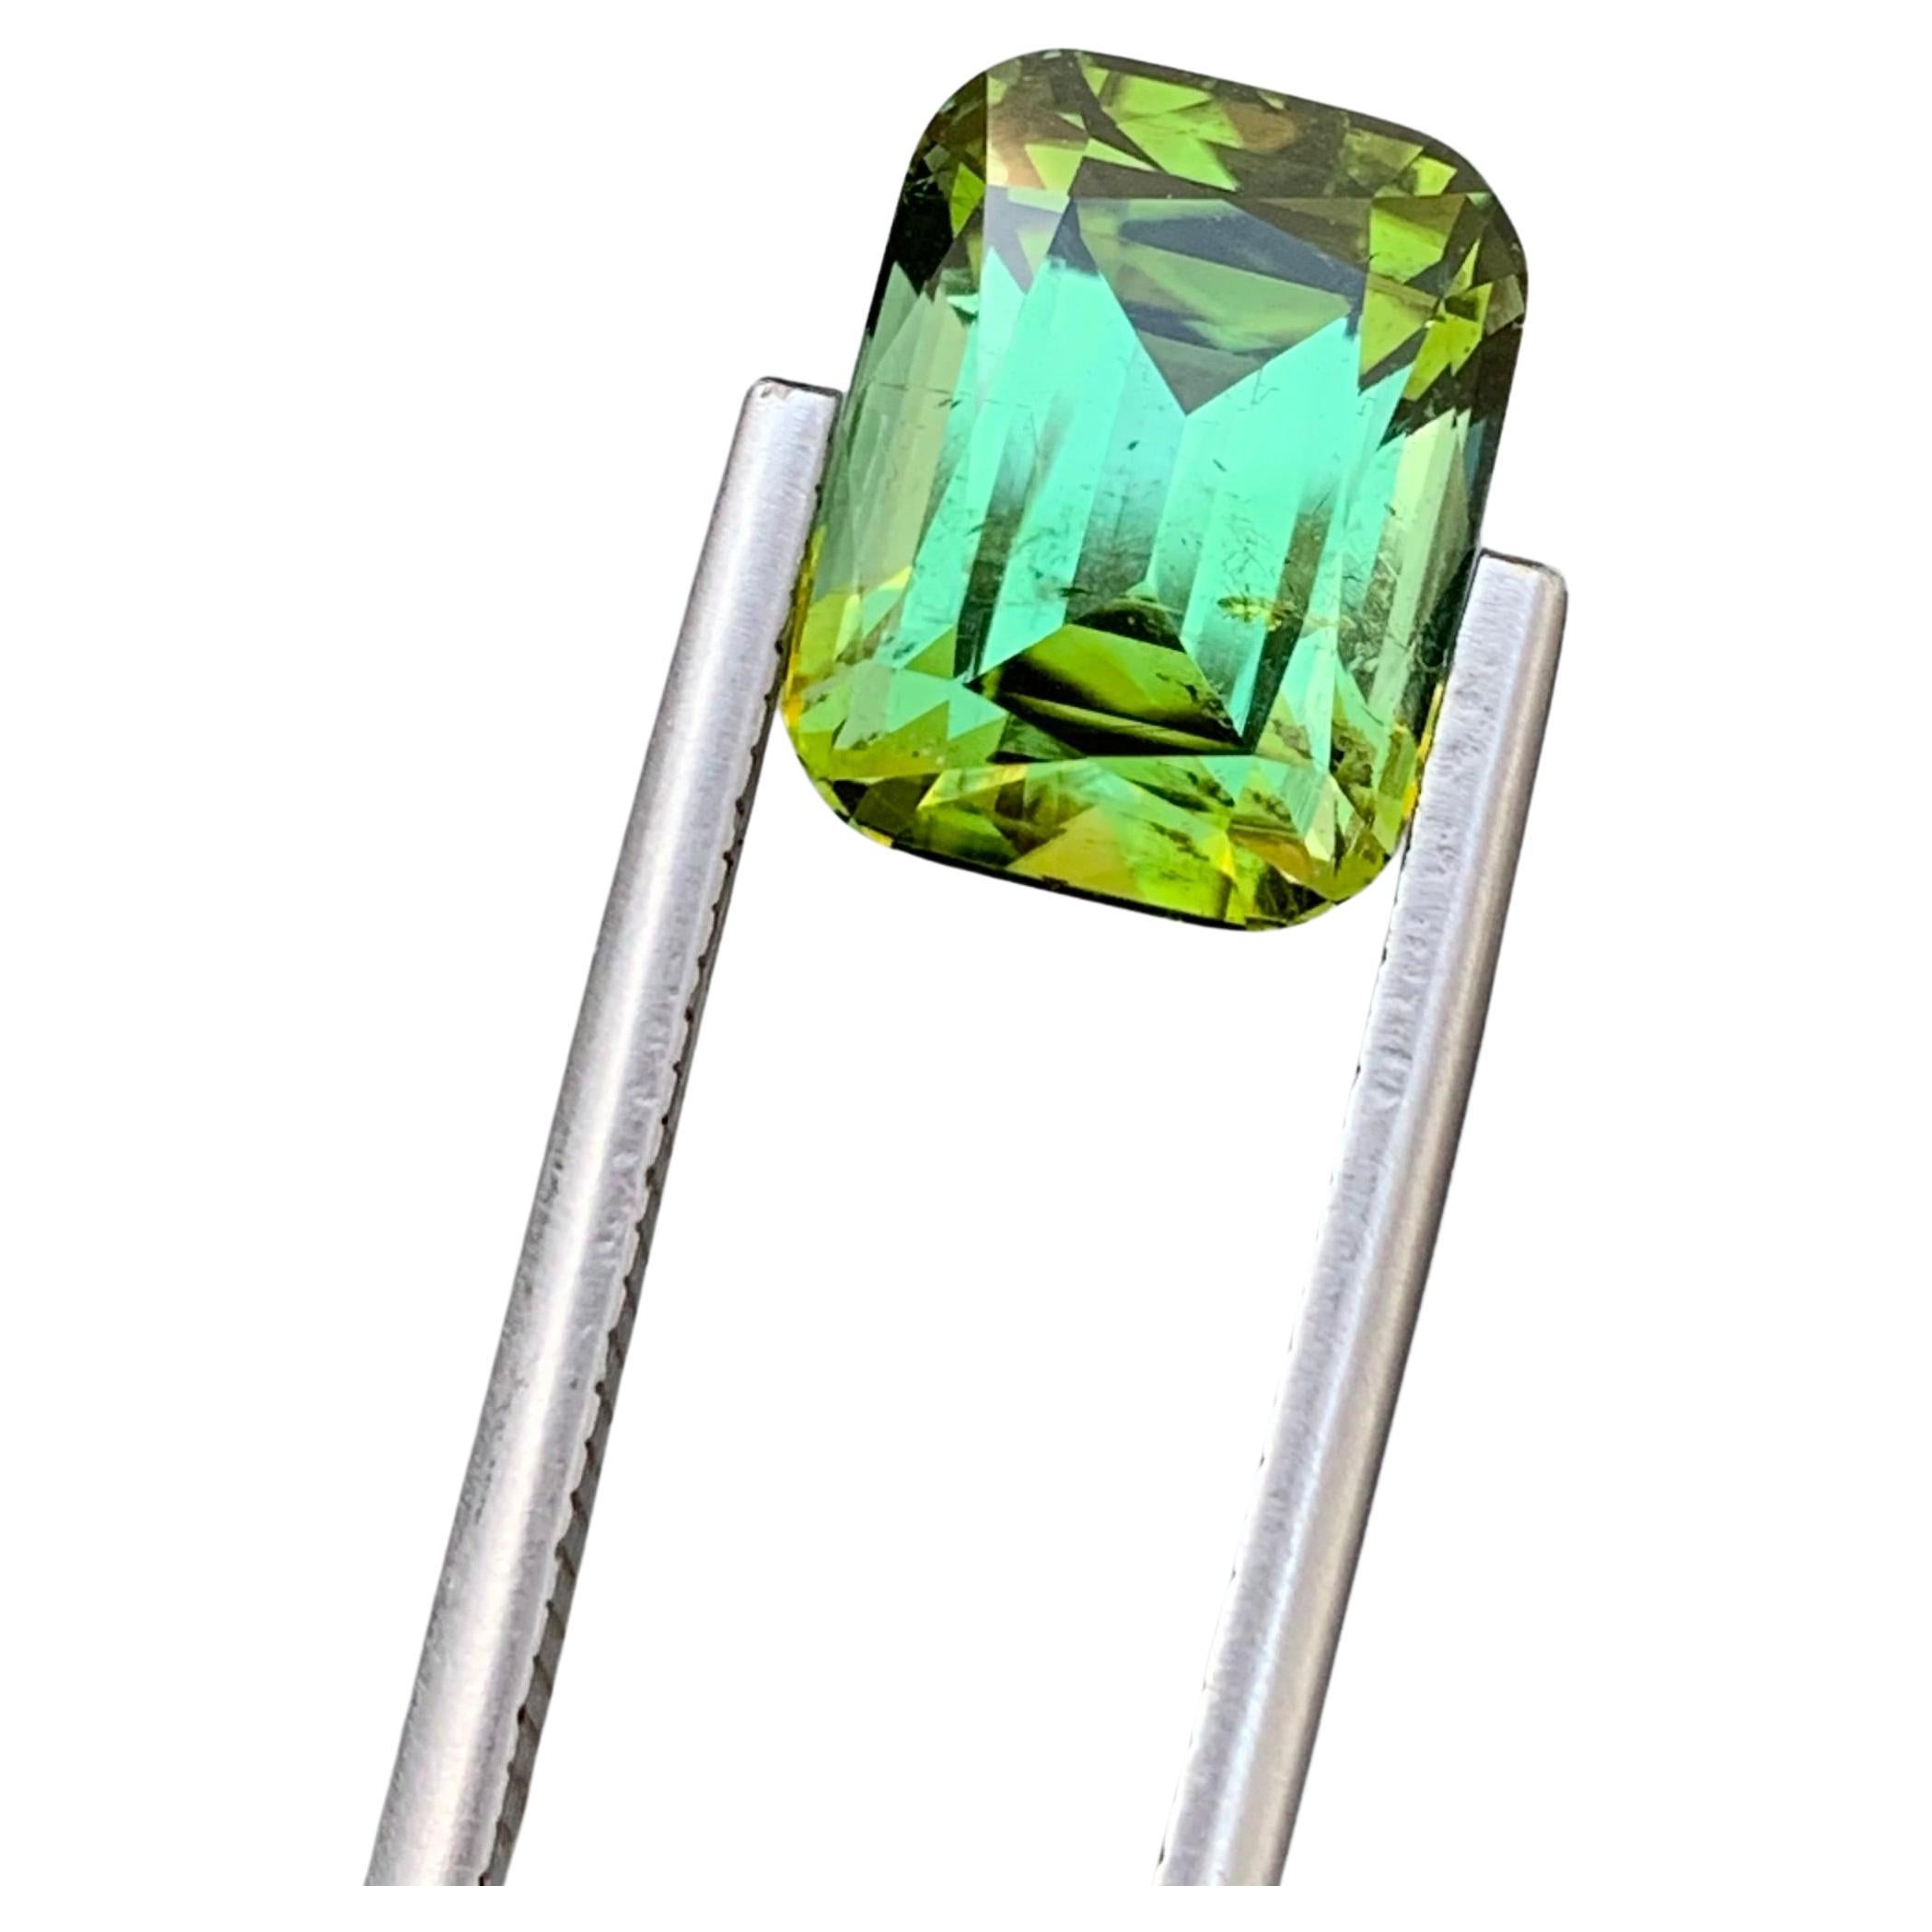 6.15 Carat Natural Loose Green Tourmaline With Lagoon Shade Emerald Shape Gem For Sale